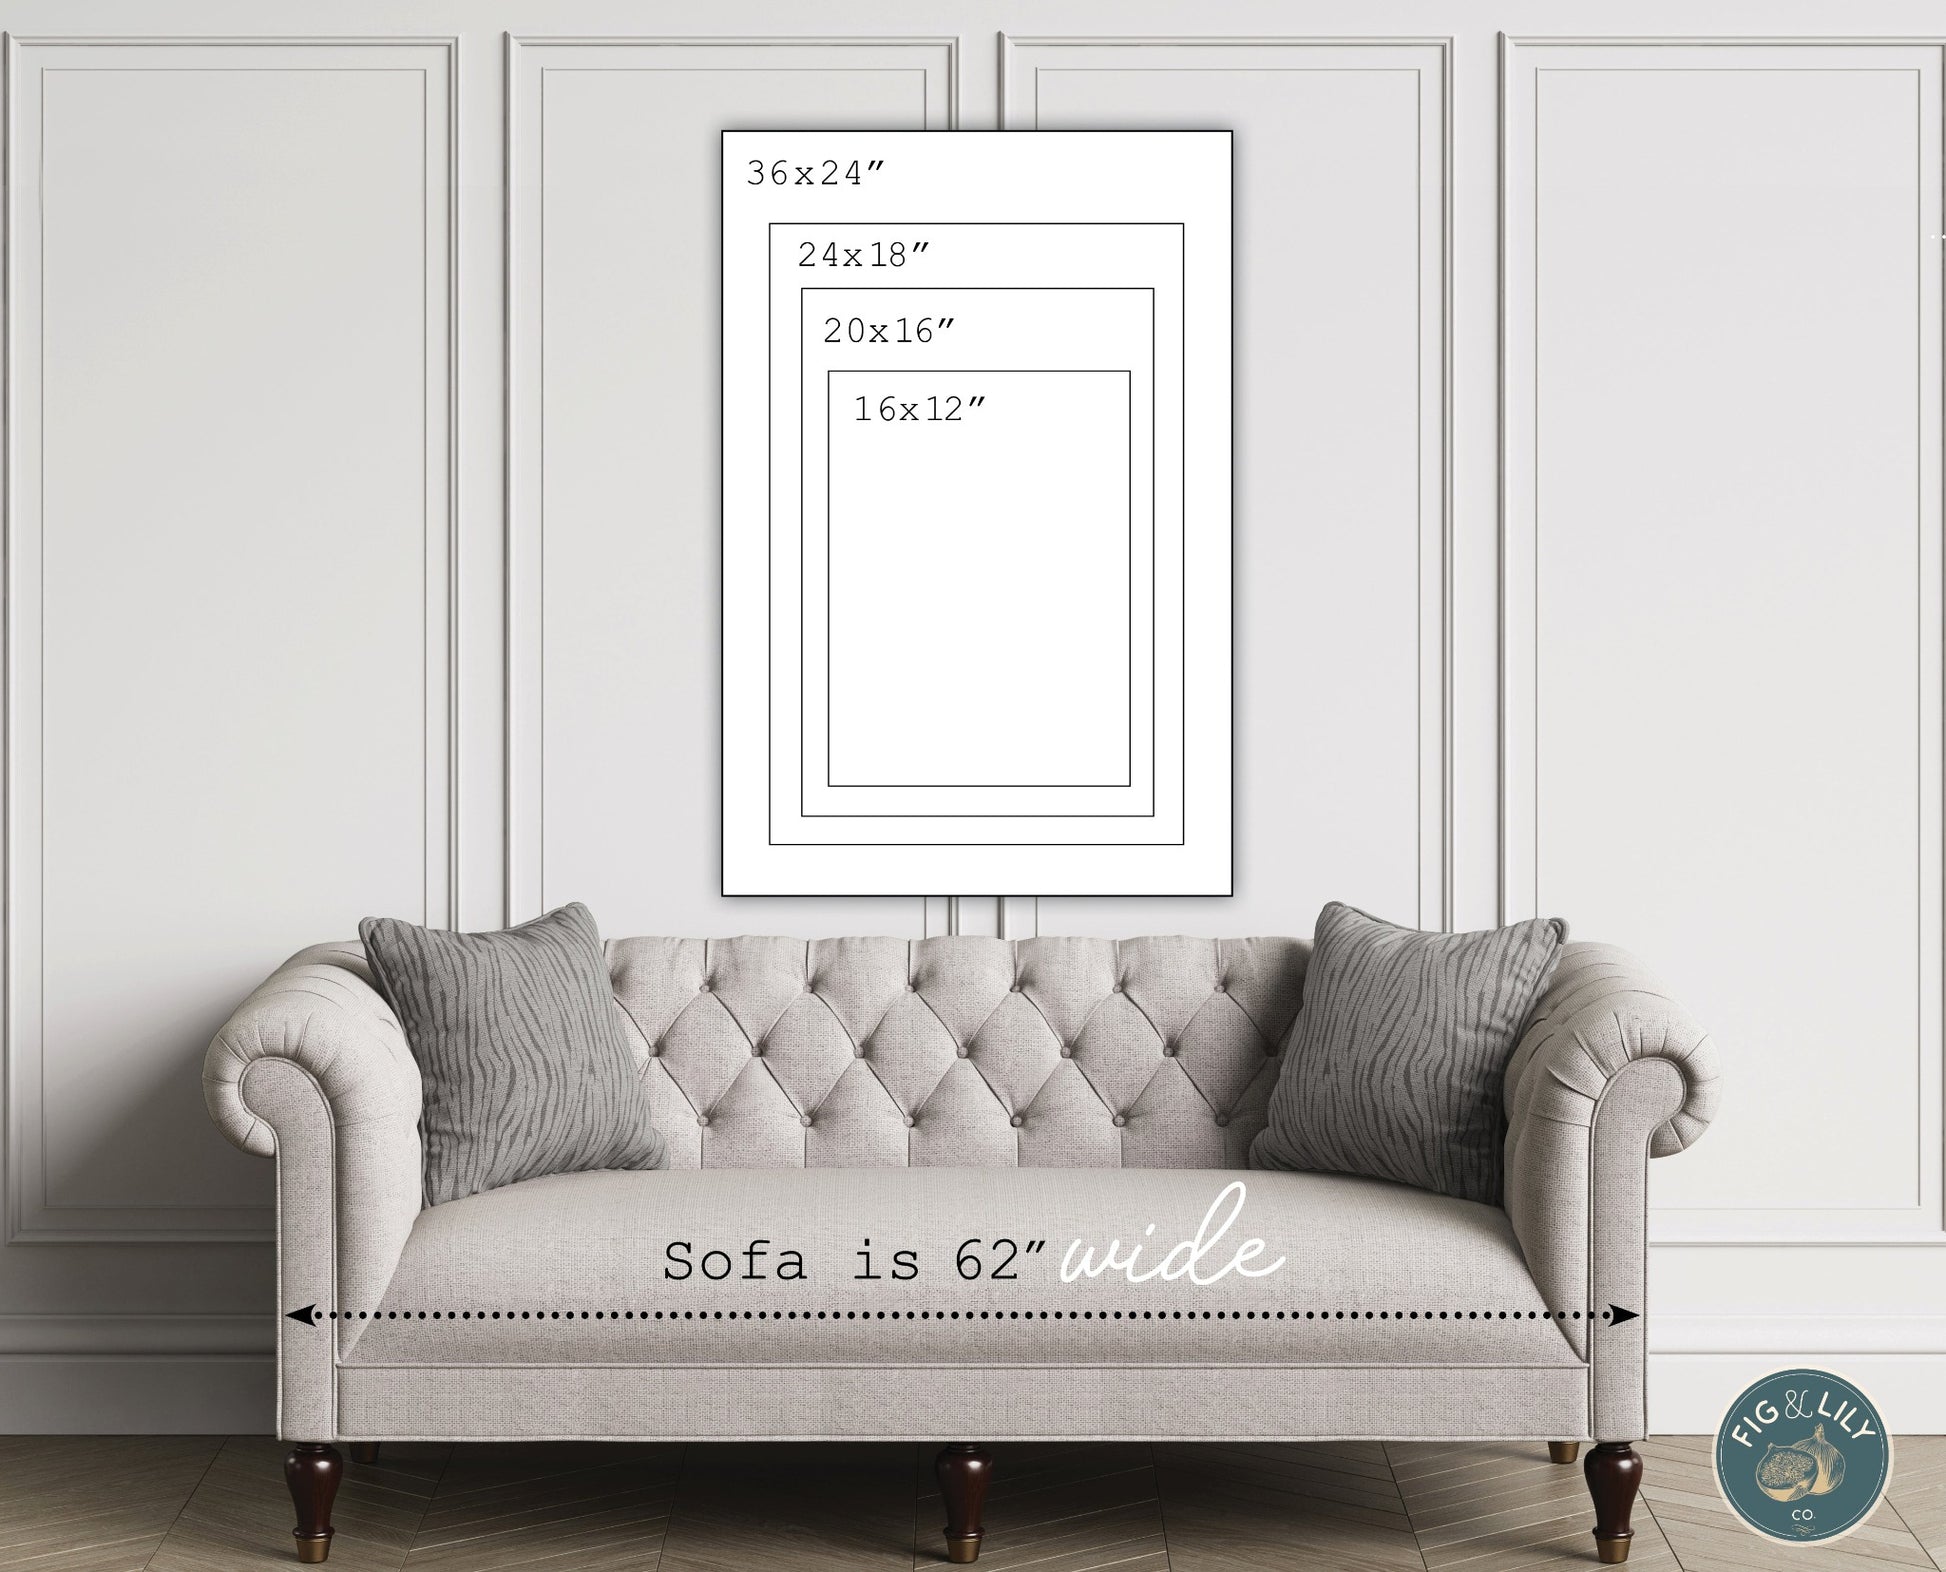 36x24", 24x18", 20x16", 16x12" Christian faith based wall art perspective size chart, gallery wrapped canvas with mounting brackets included, for home decor, school, church, or office